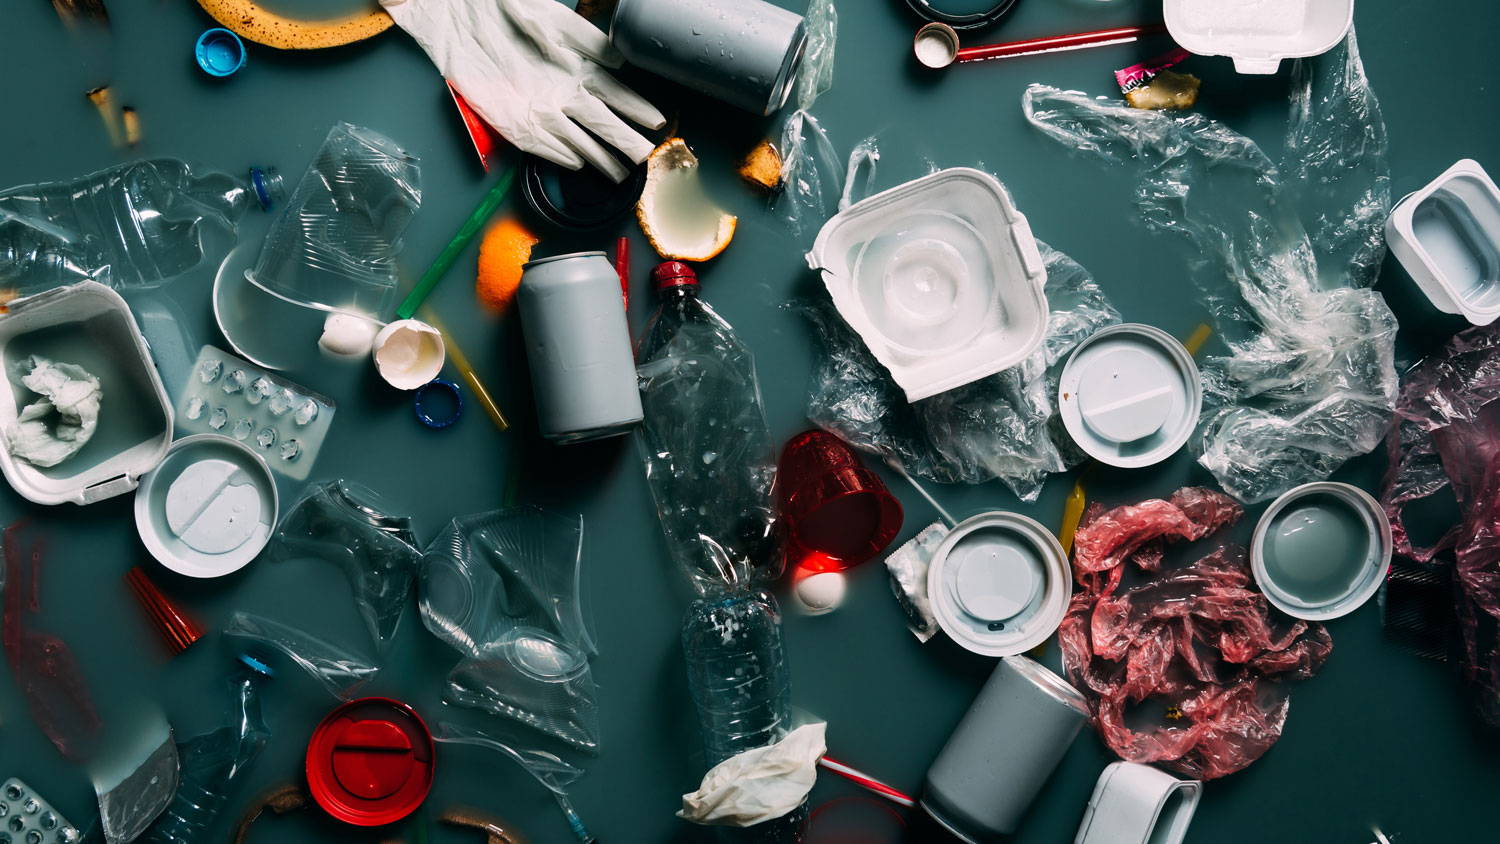 Guess how long it takes for plastic to biodegrade: Forever